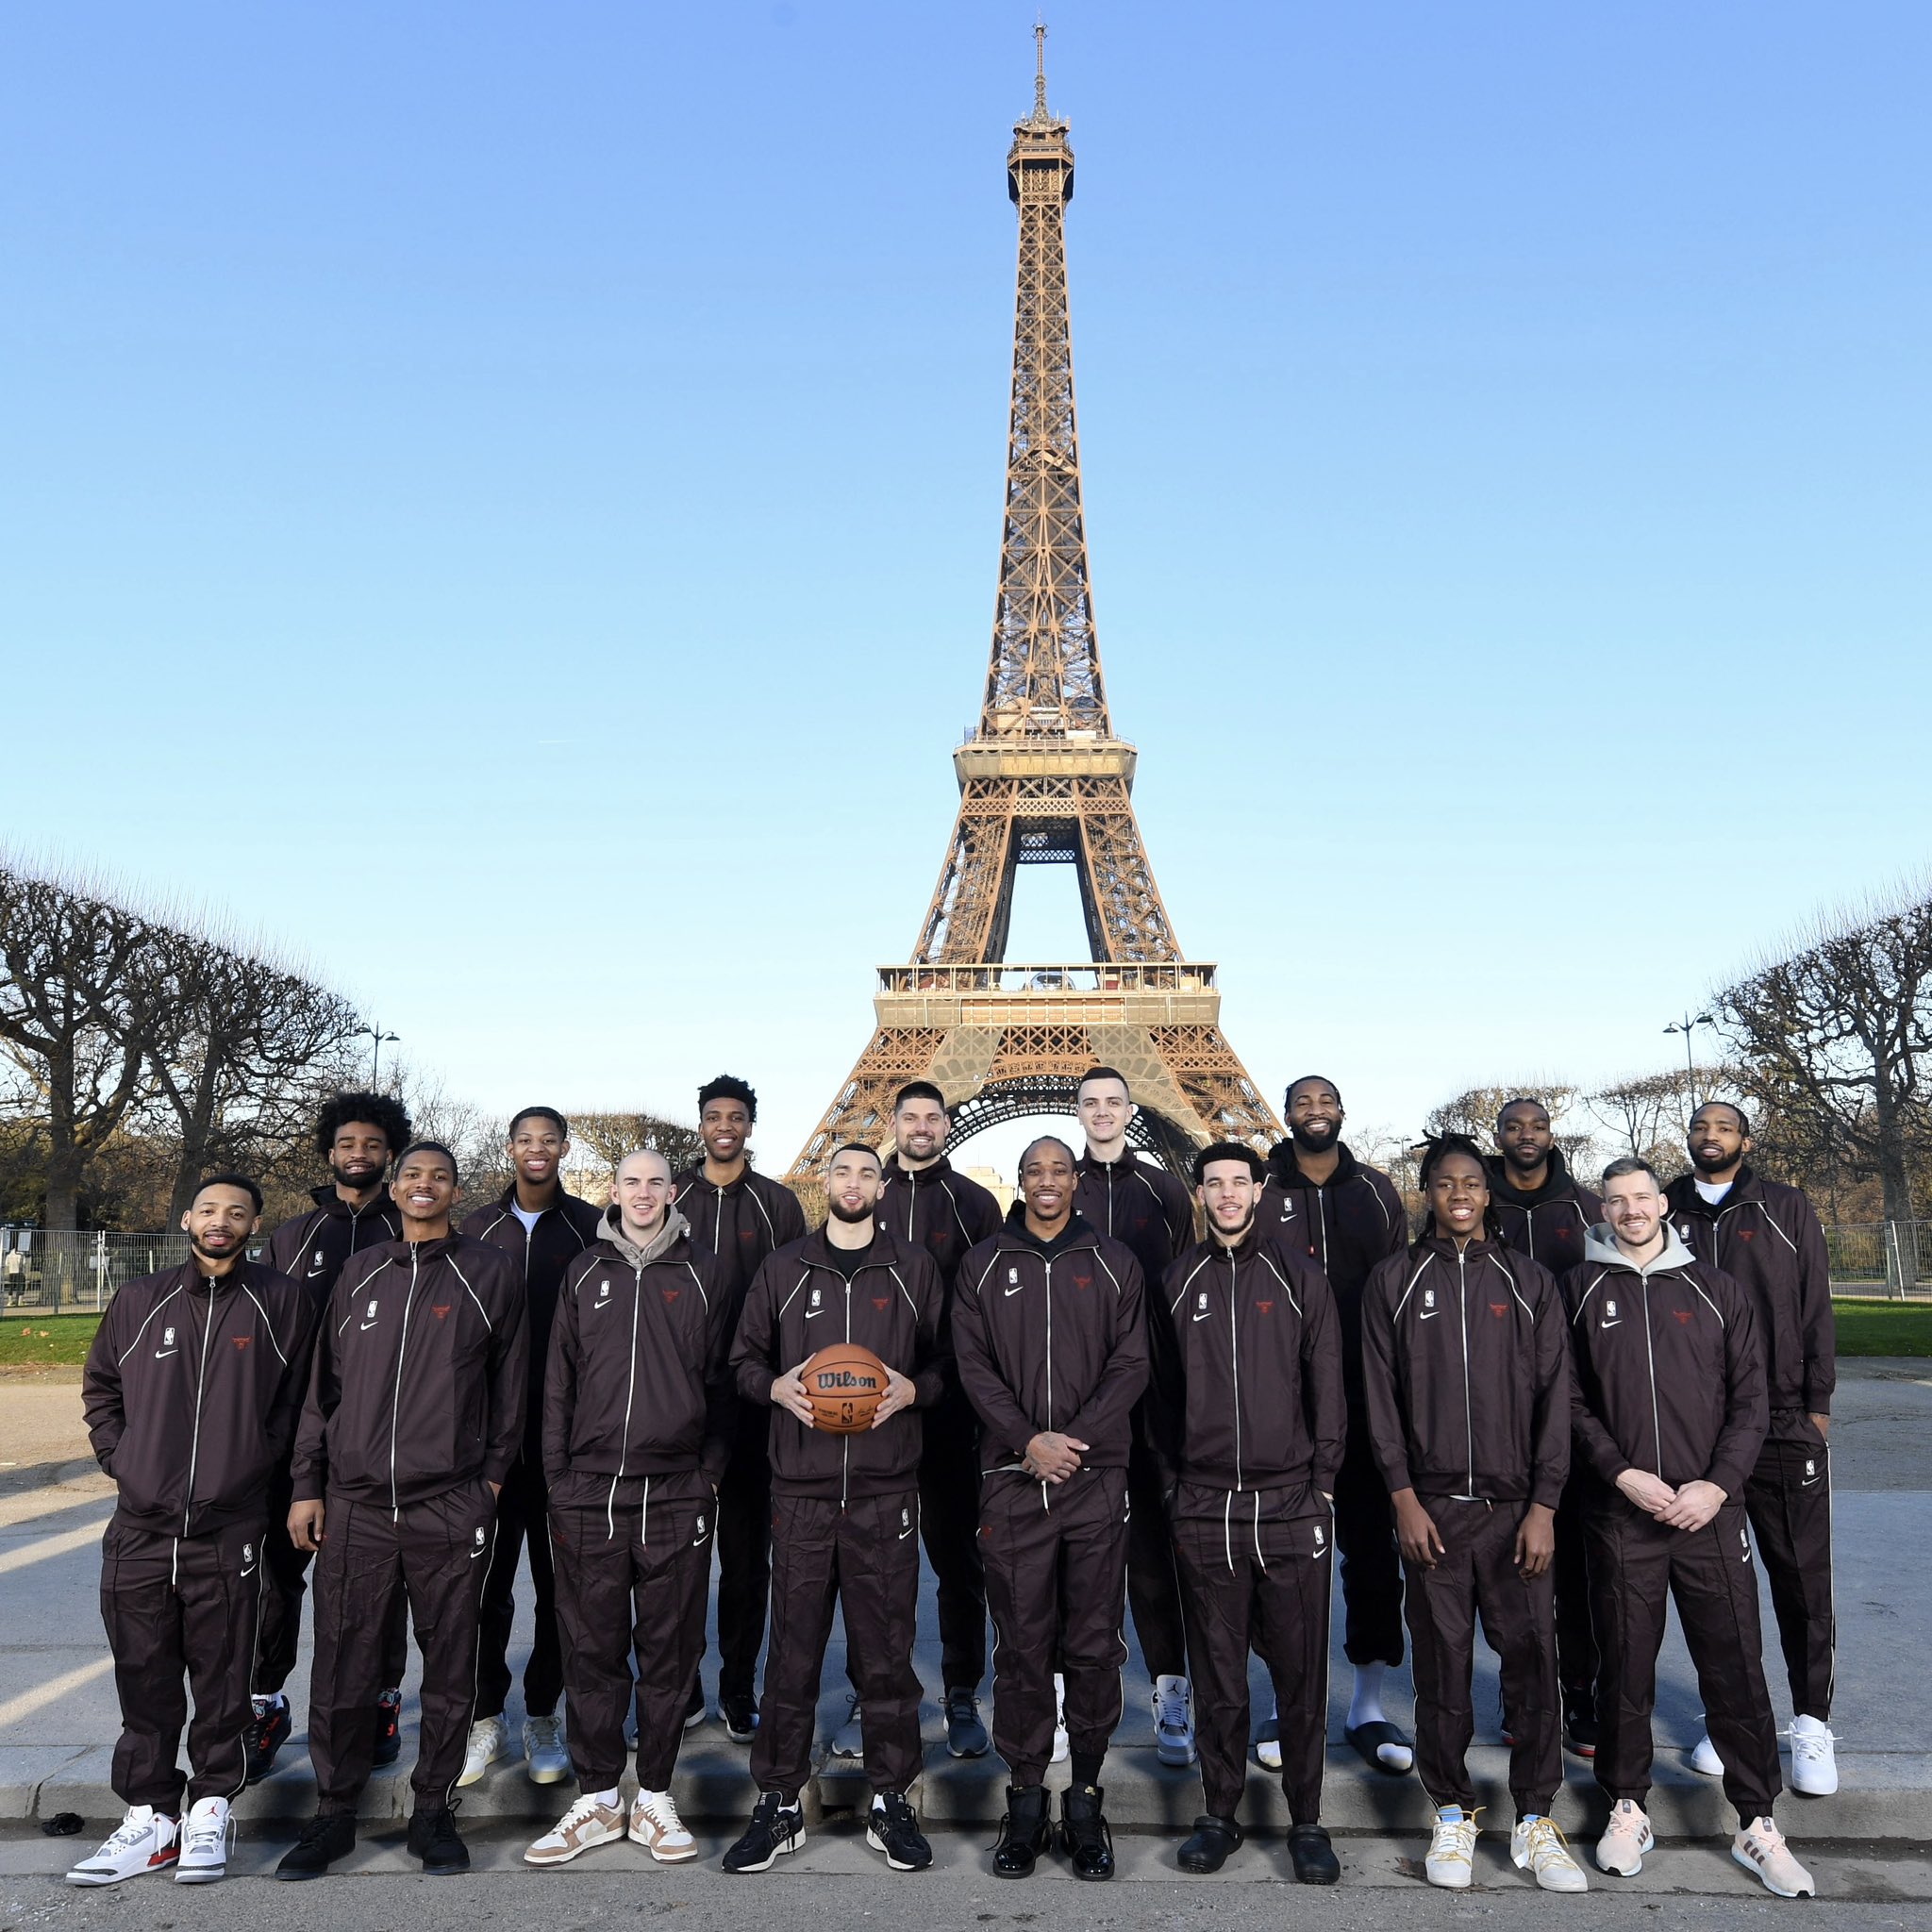 Chicago Bulls visit the Eiffel Tower in Paris ahead of the NBA games.